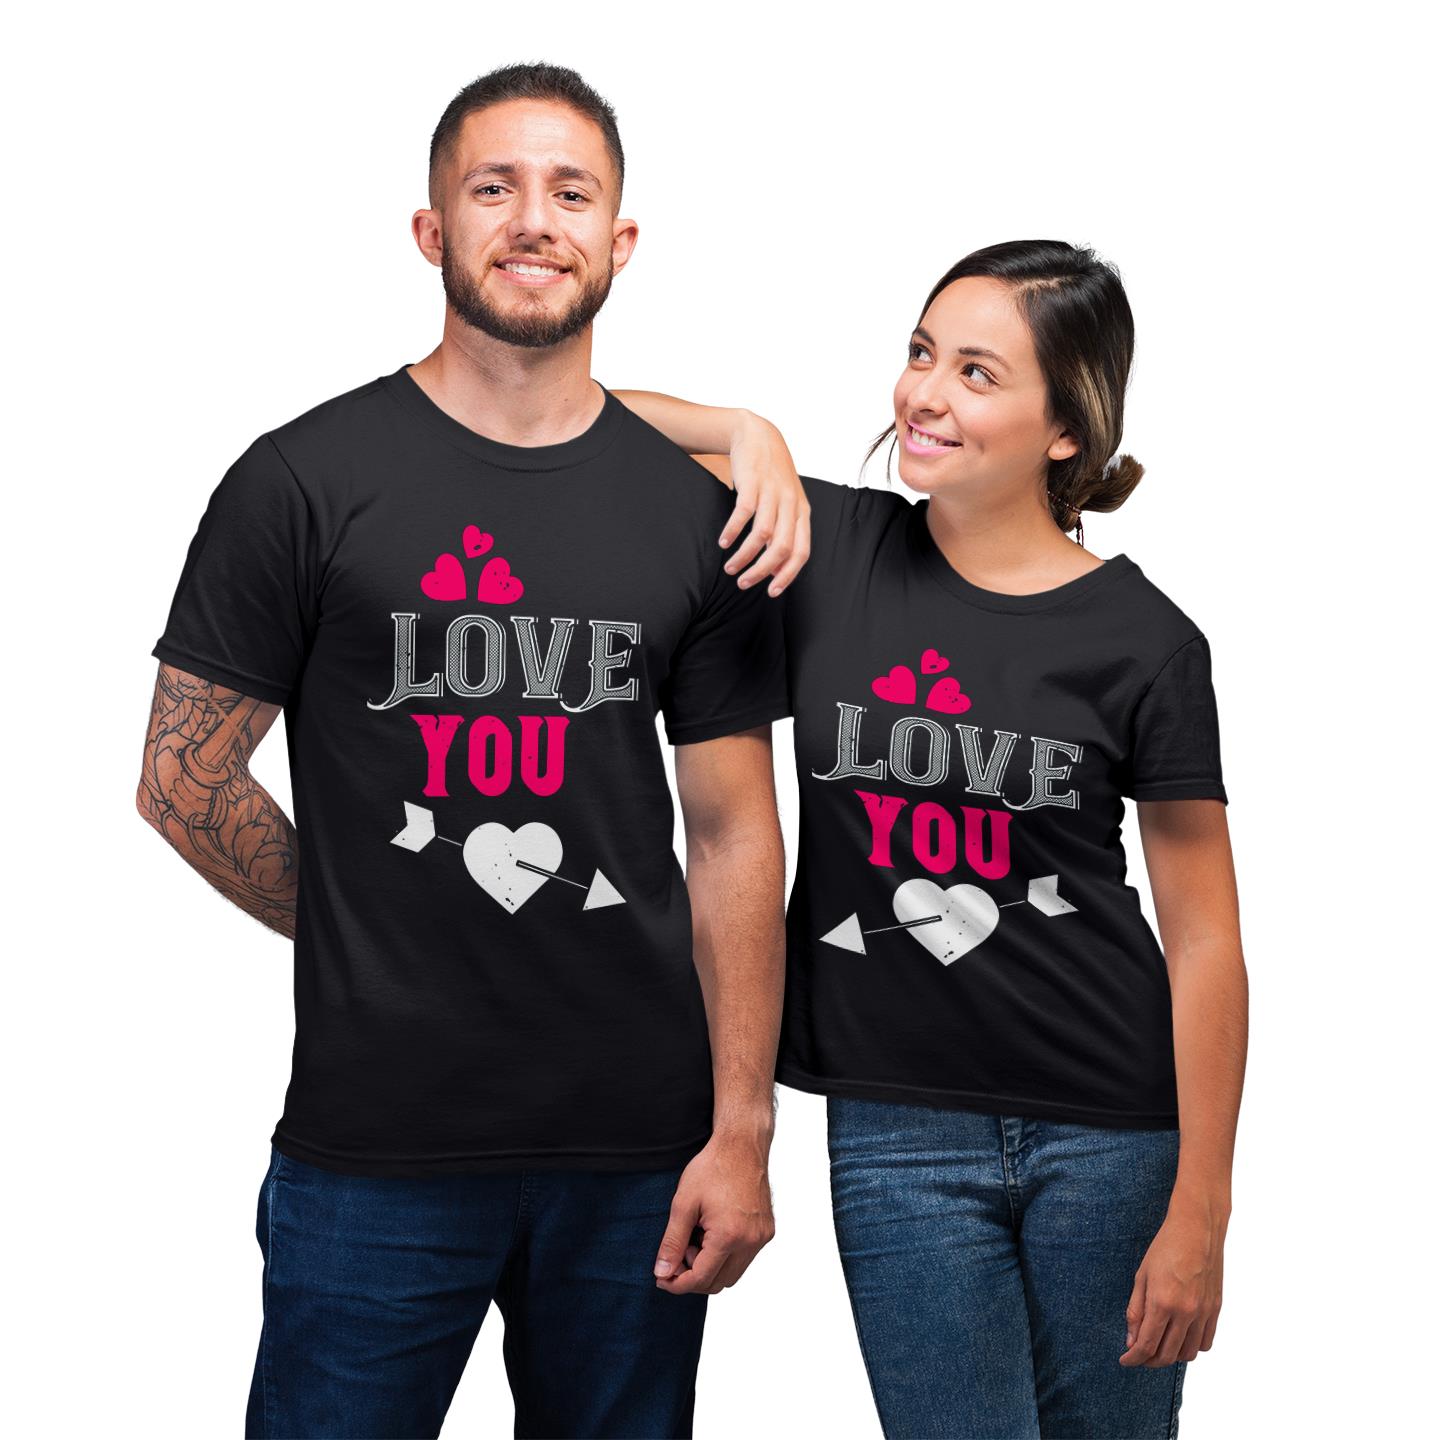 Love You Heart Cupid Arrow His And Her Shirt For Couples Lover Matching T-shirt